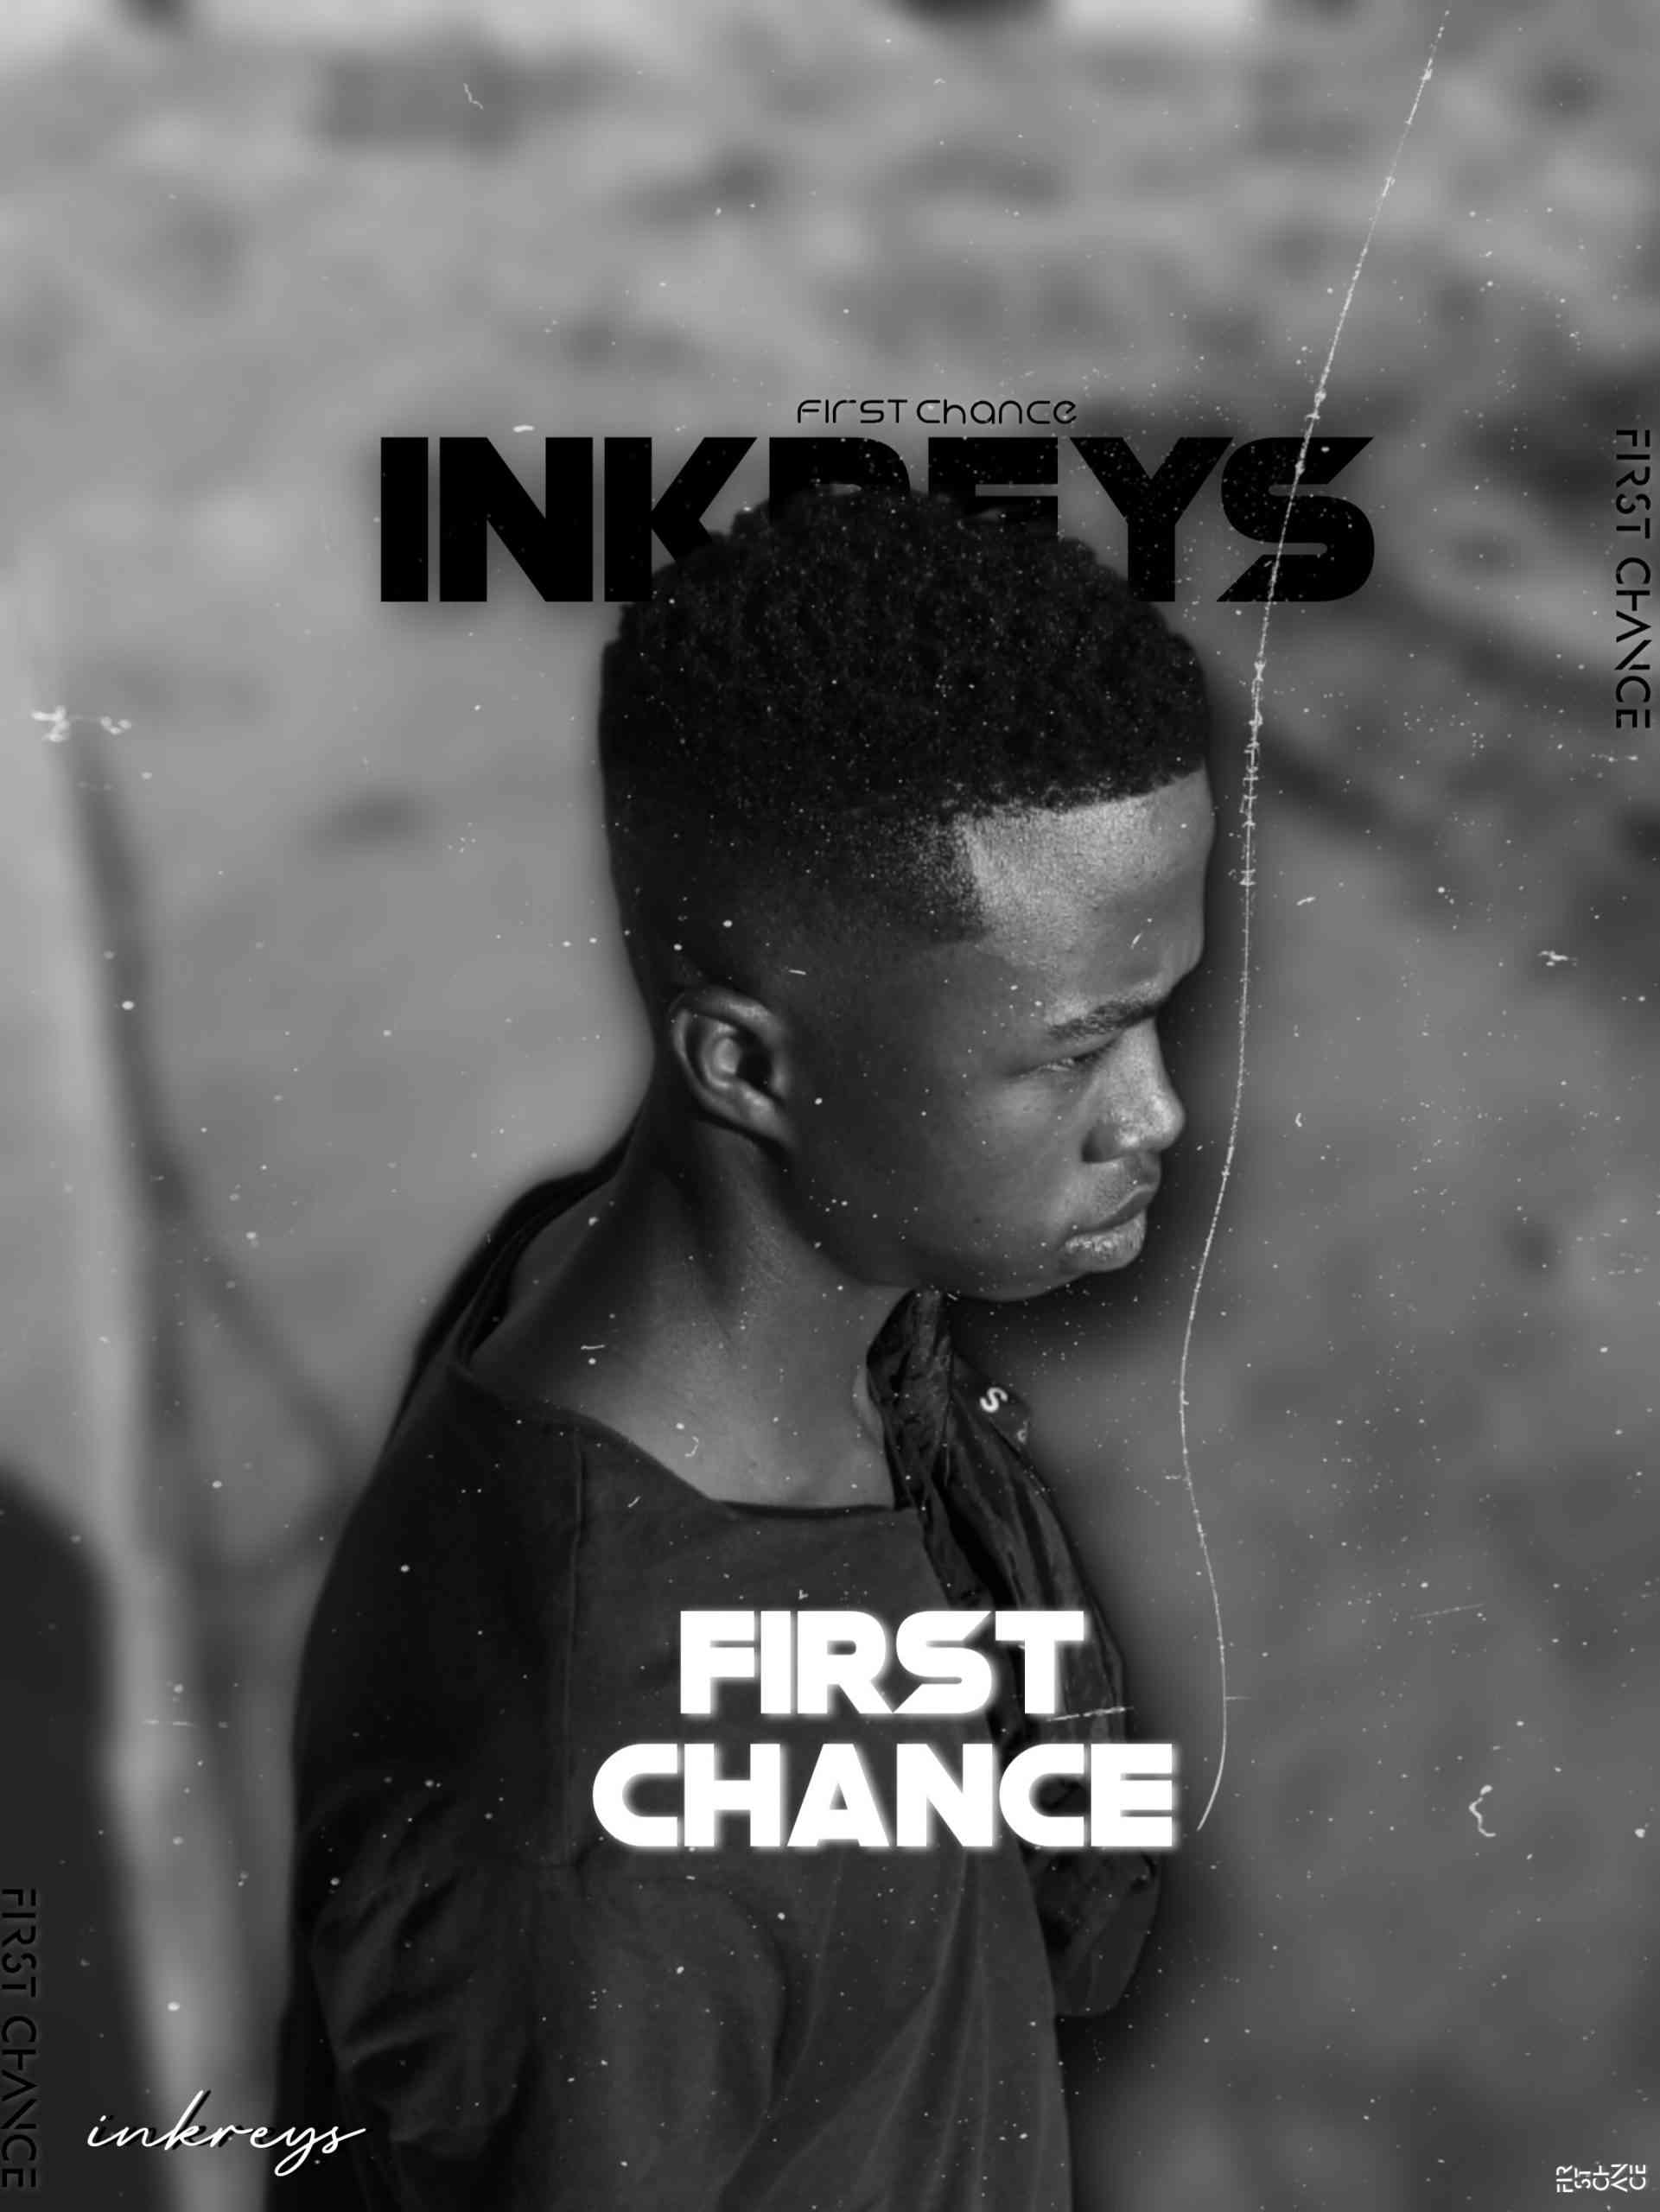 Inkreys First chance EP